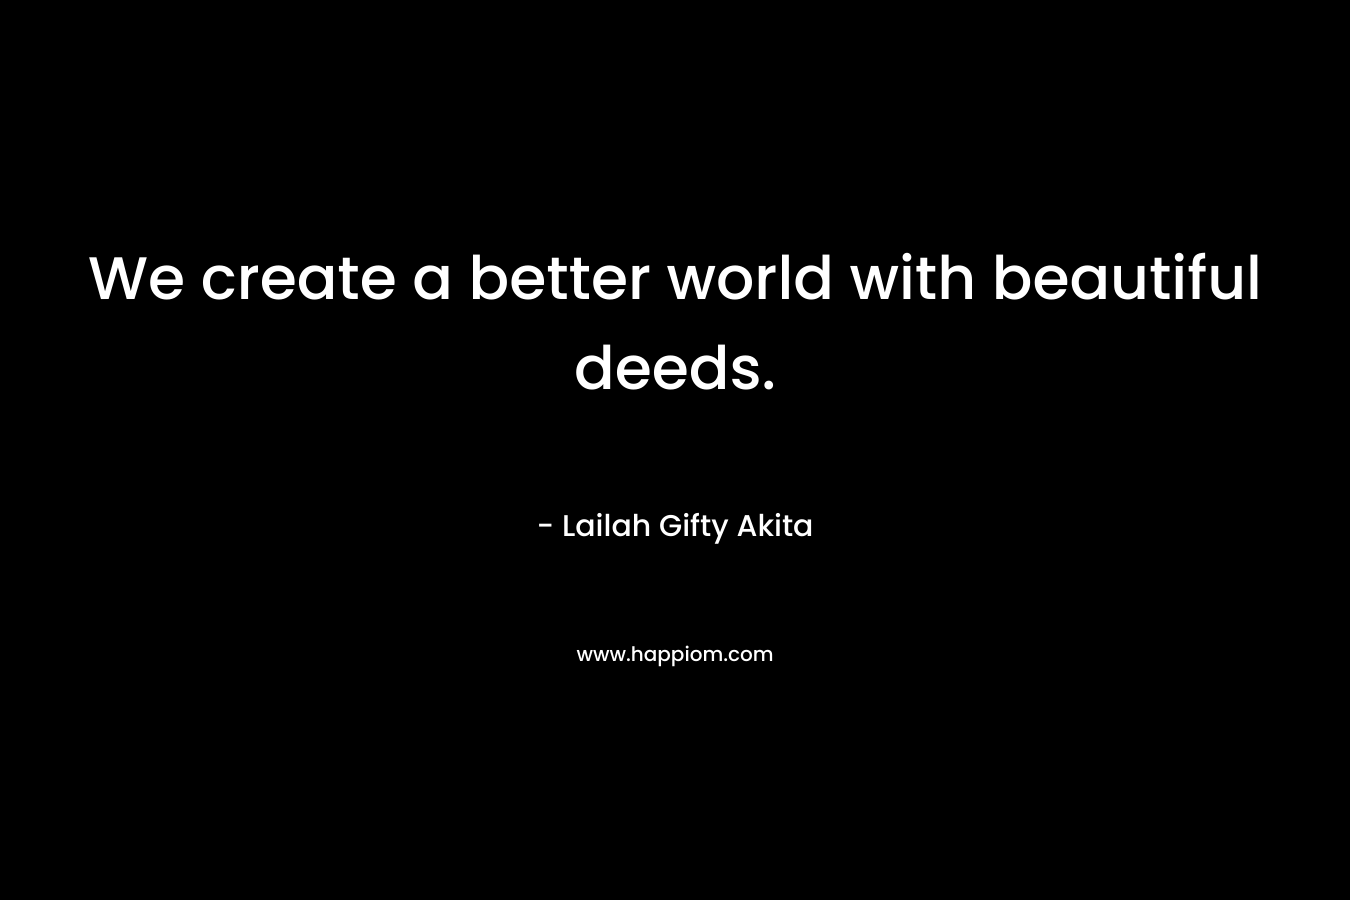 We create a better world with beautiful deeds.